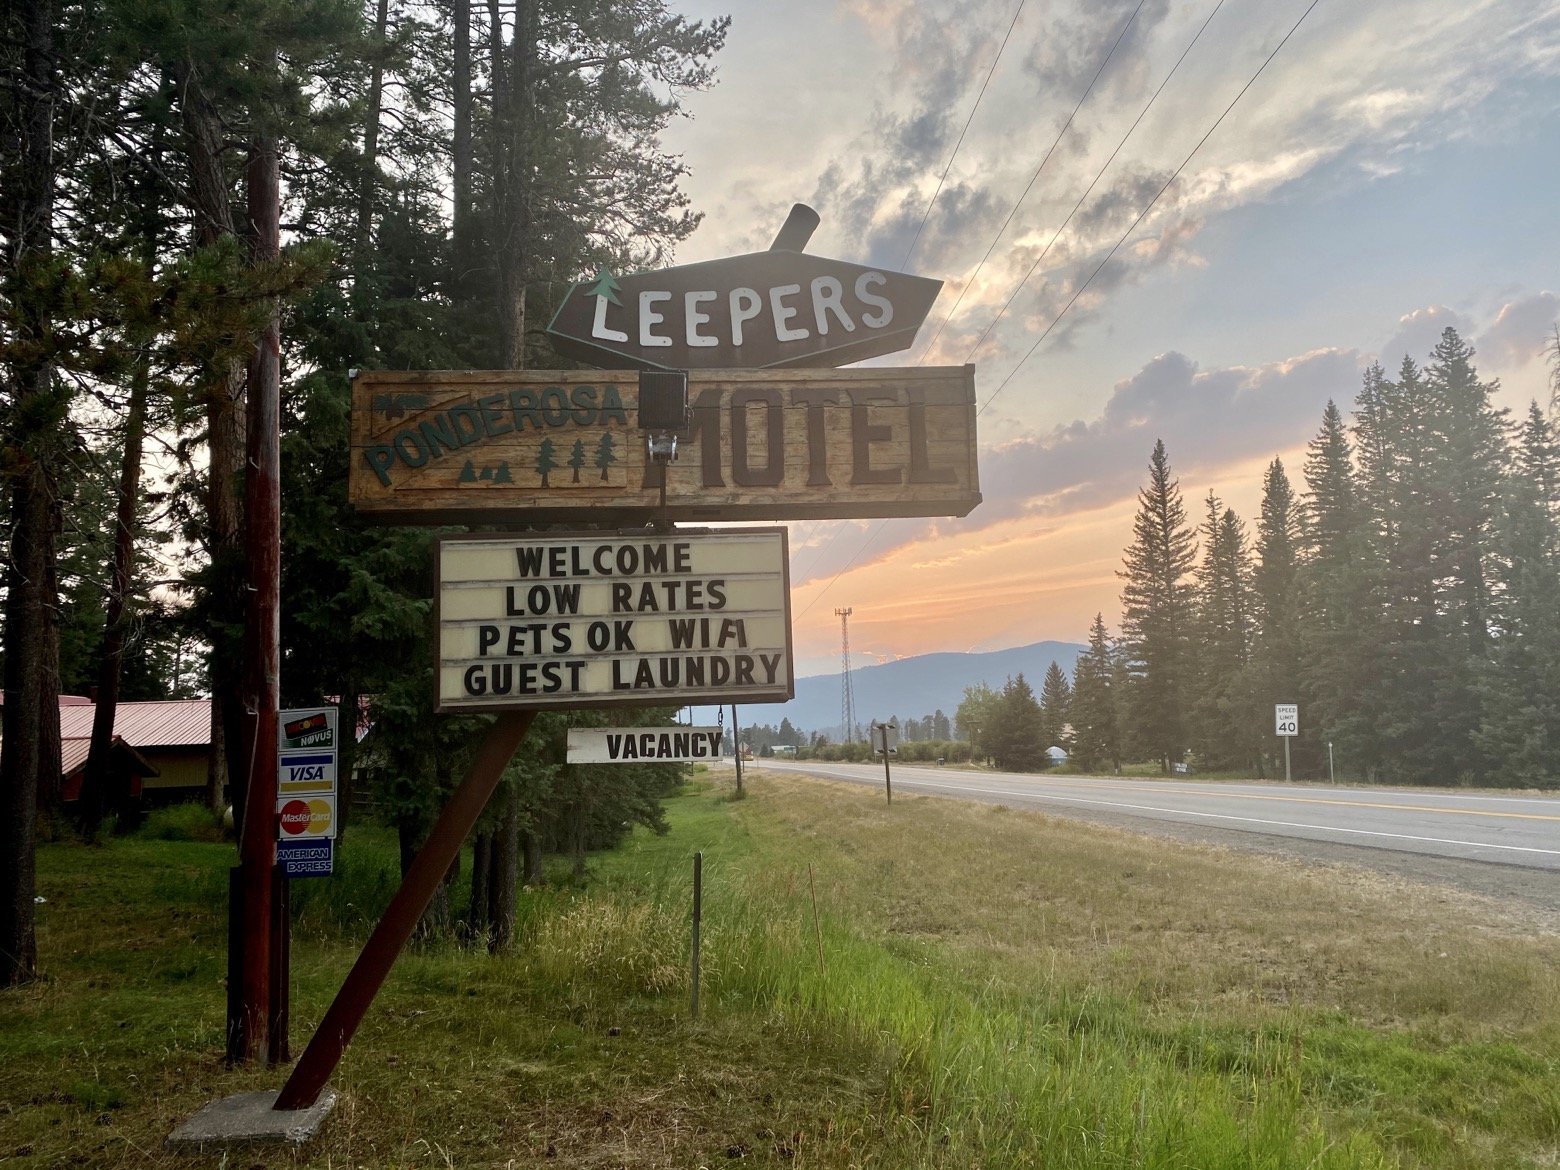 Leepers Motel, our home for the next 48 hours